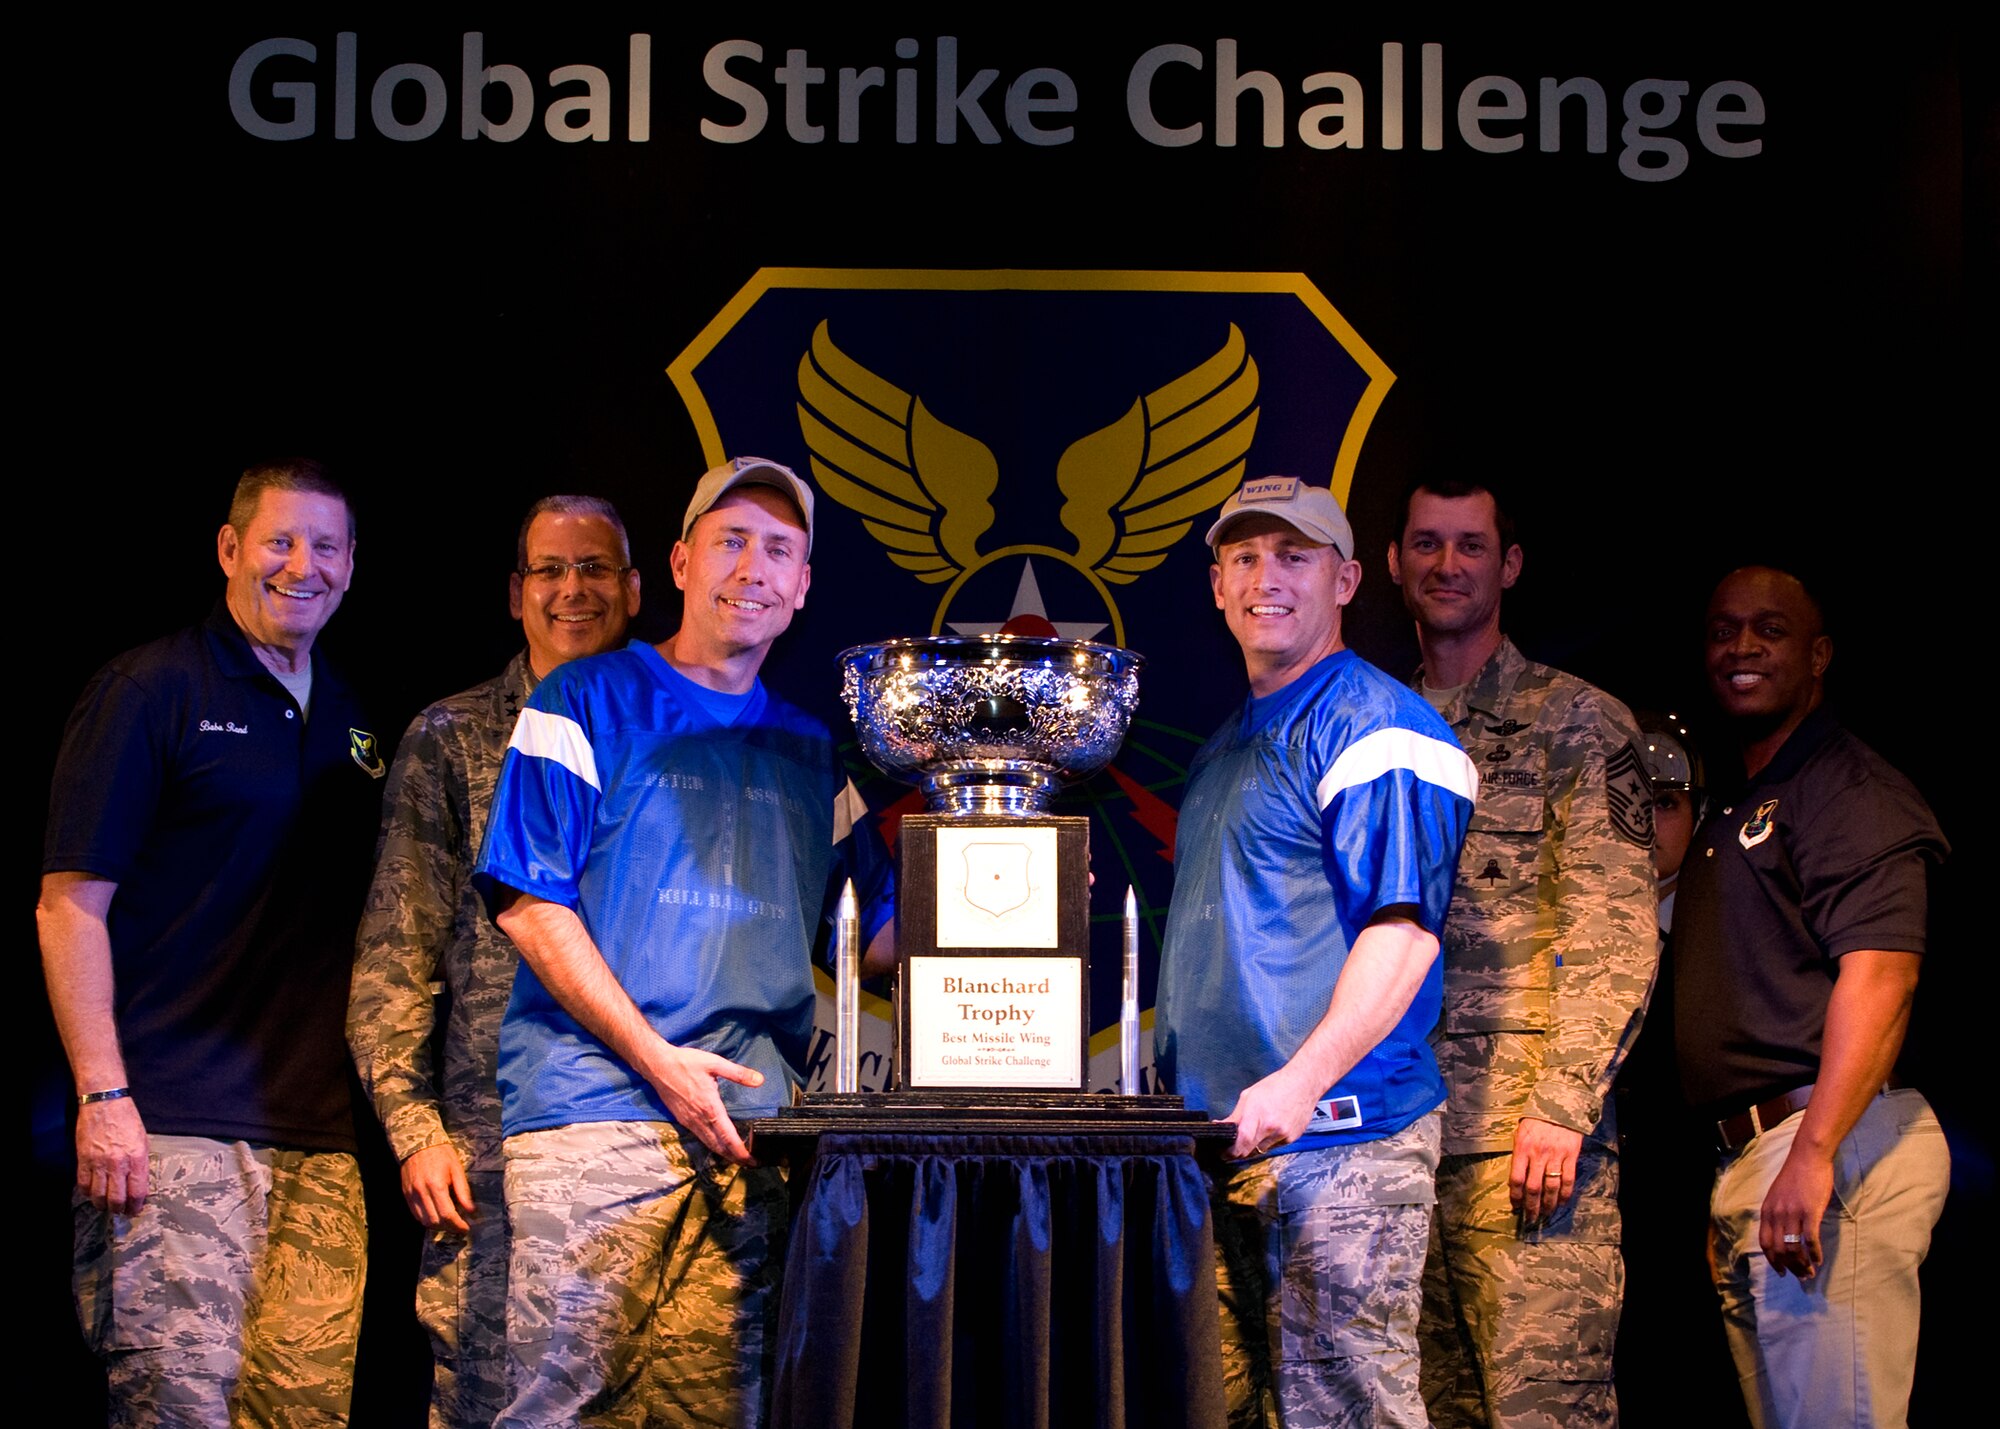 Col. John T. Wilcox, 341st Missile Wing commander, accepts the Blanchard Trophy for the best ICBM wing in the Air Force on behalf of the Airmen of Malmstrom Air Force Base, Mont., at the 2015 Global Strike Challenge trophy presentation at Barksdale AFB, La., Oct. 21, 2015. Global Strike Challenge is the nation’s premier bomber, ICBM, helicopter operations and security forces competition with units from Air Force Global Strike Command, Air Combat Command, Air Force Reserve Command and the Air National Guard. (U.S. Air Force photo/Senior Airman Joseph Raatz)